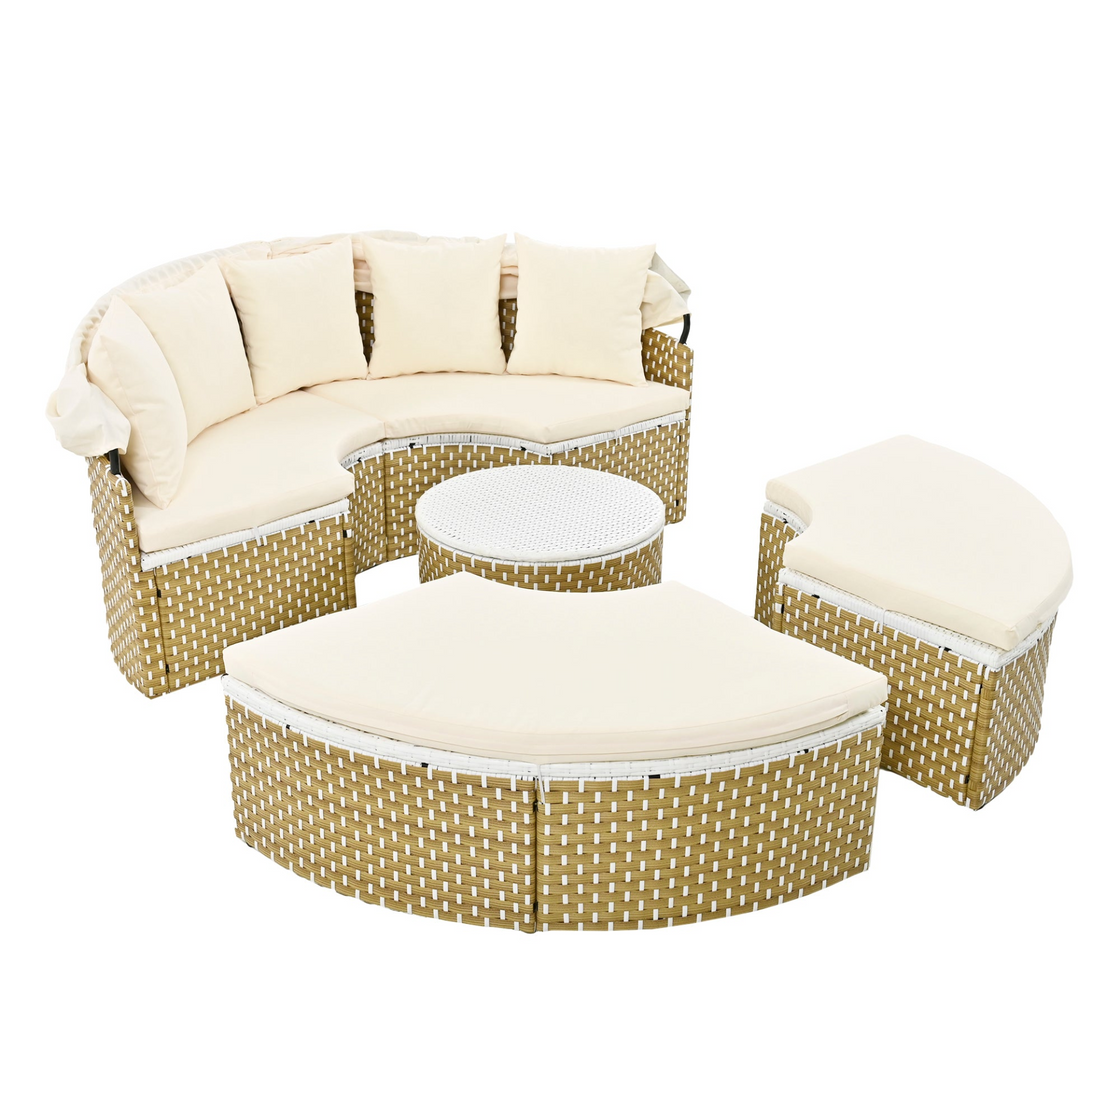 Patio Furniture Round Outdoor Sectional Sofa Set Rattan Daybed with Canopy, Beige